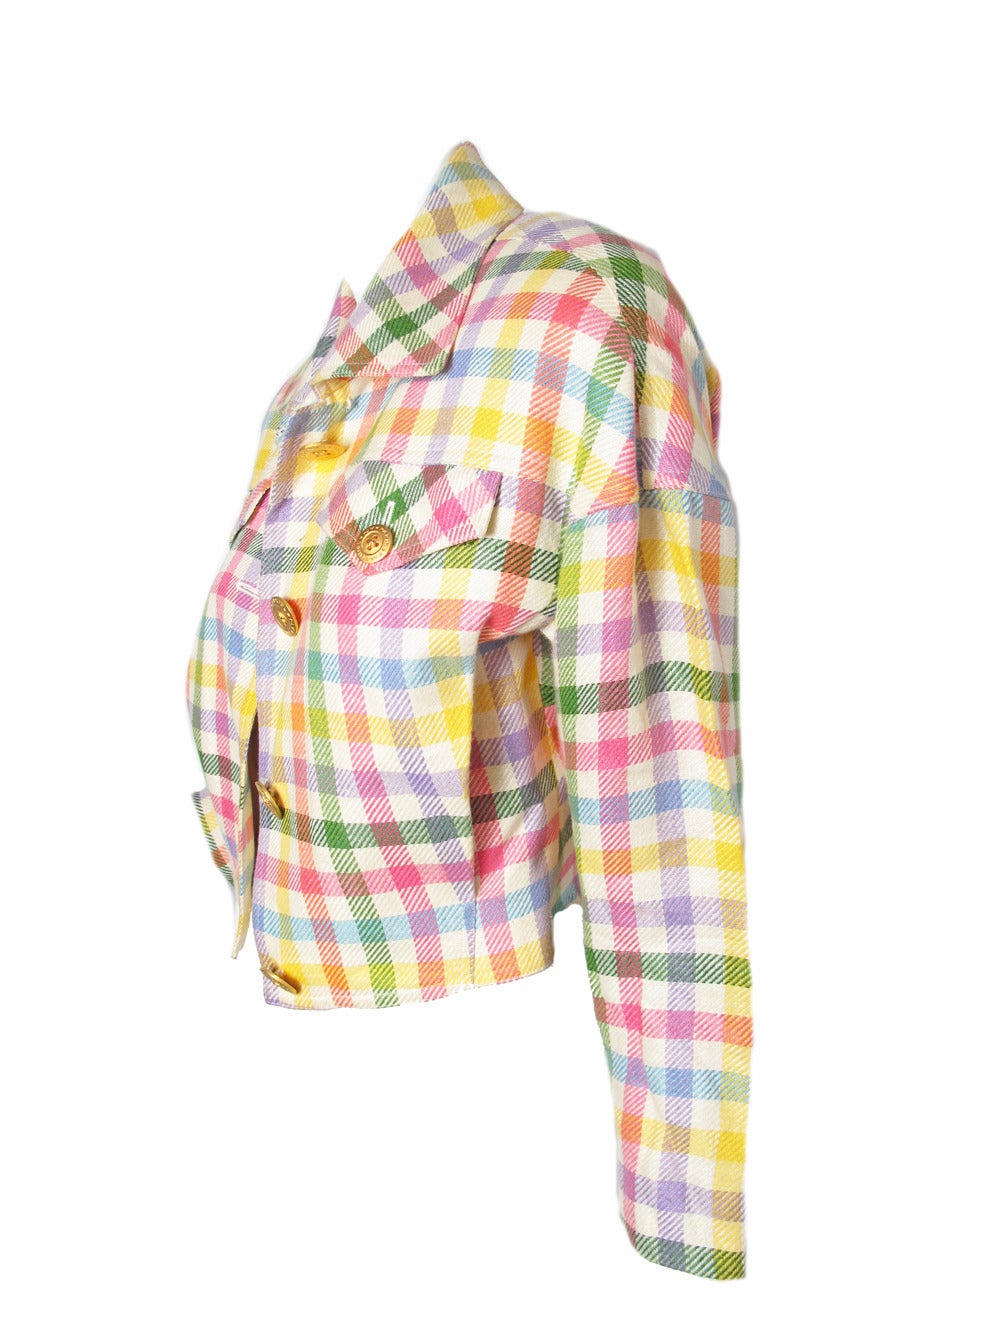 Emanuel Ungaro wool pastel cropped plaid jacket with metal buttons.  Condition: Very good, small spot.   38" bust, 30" waist, 16" sleeve, 18" length. Size 4